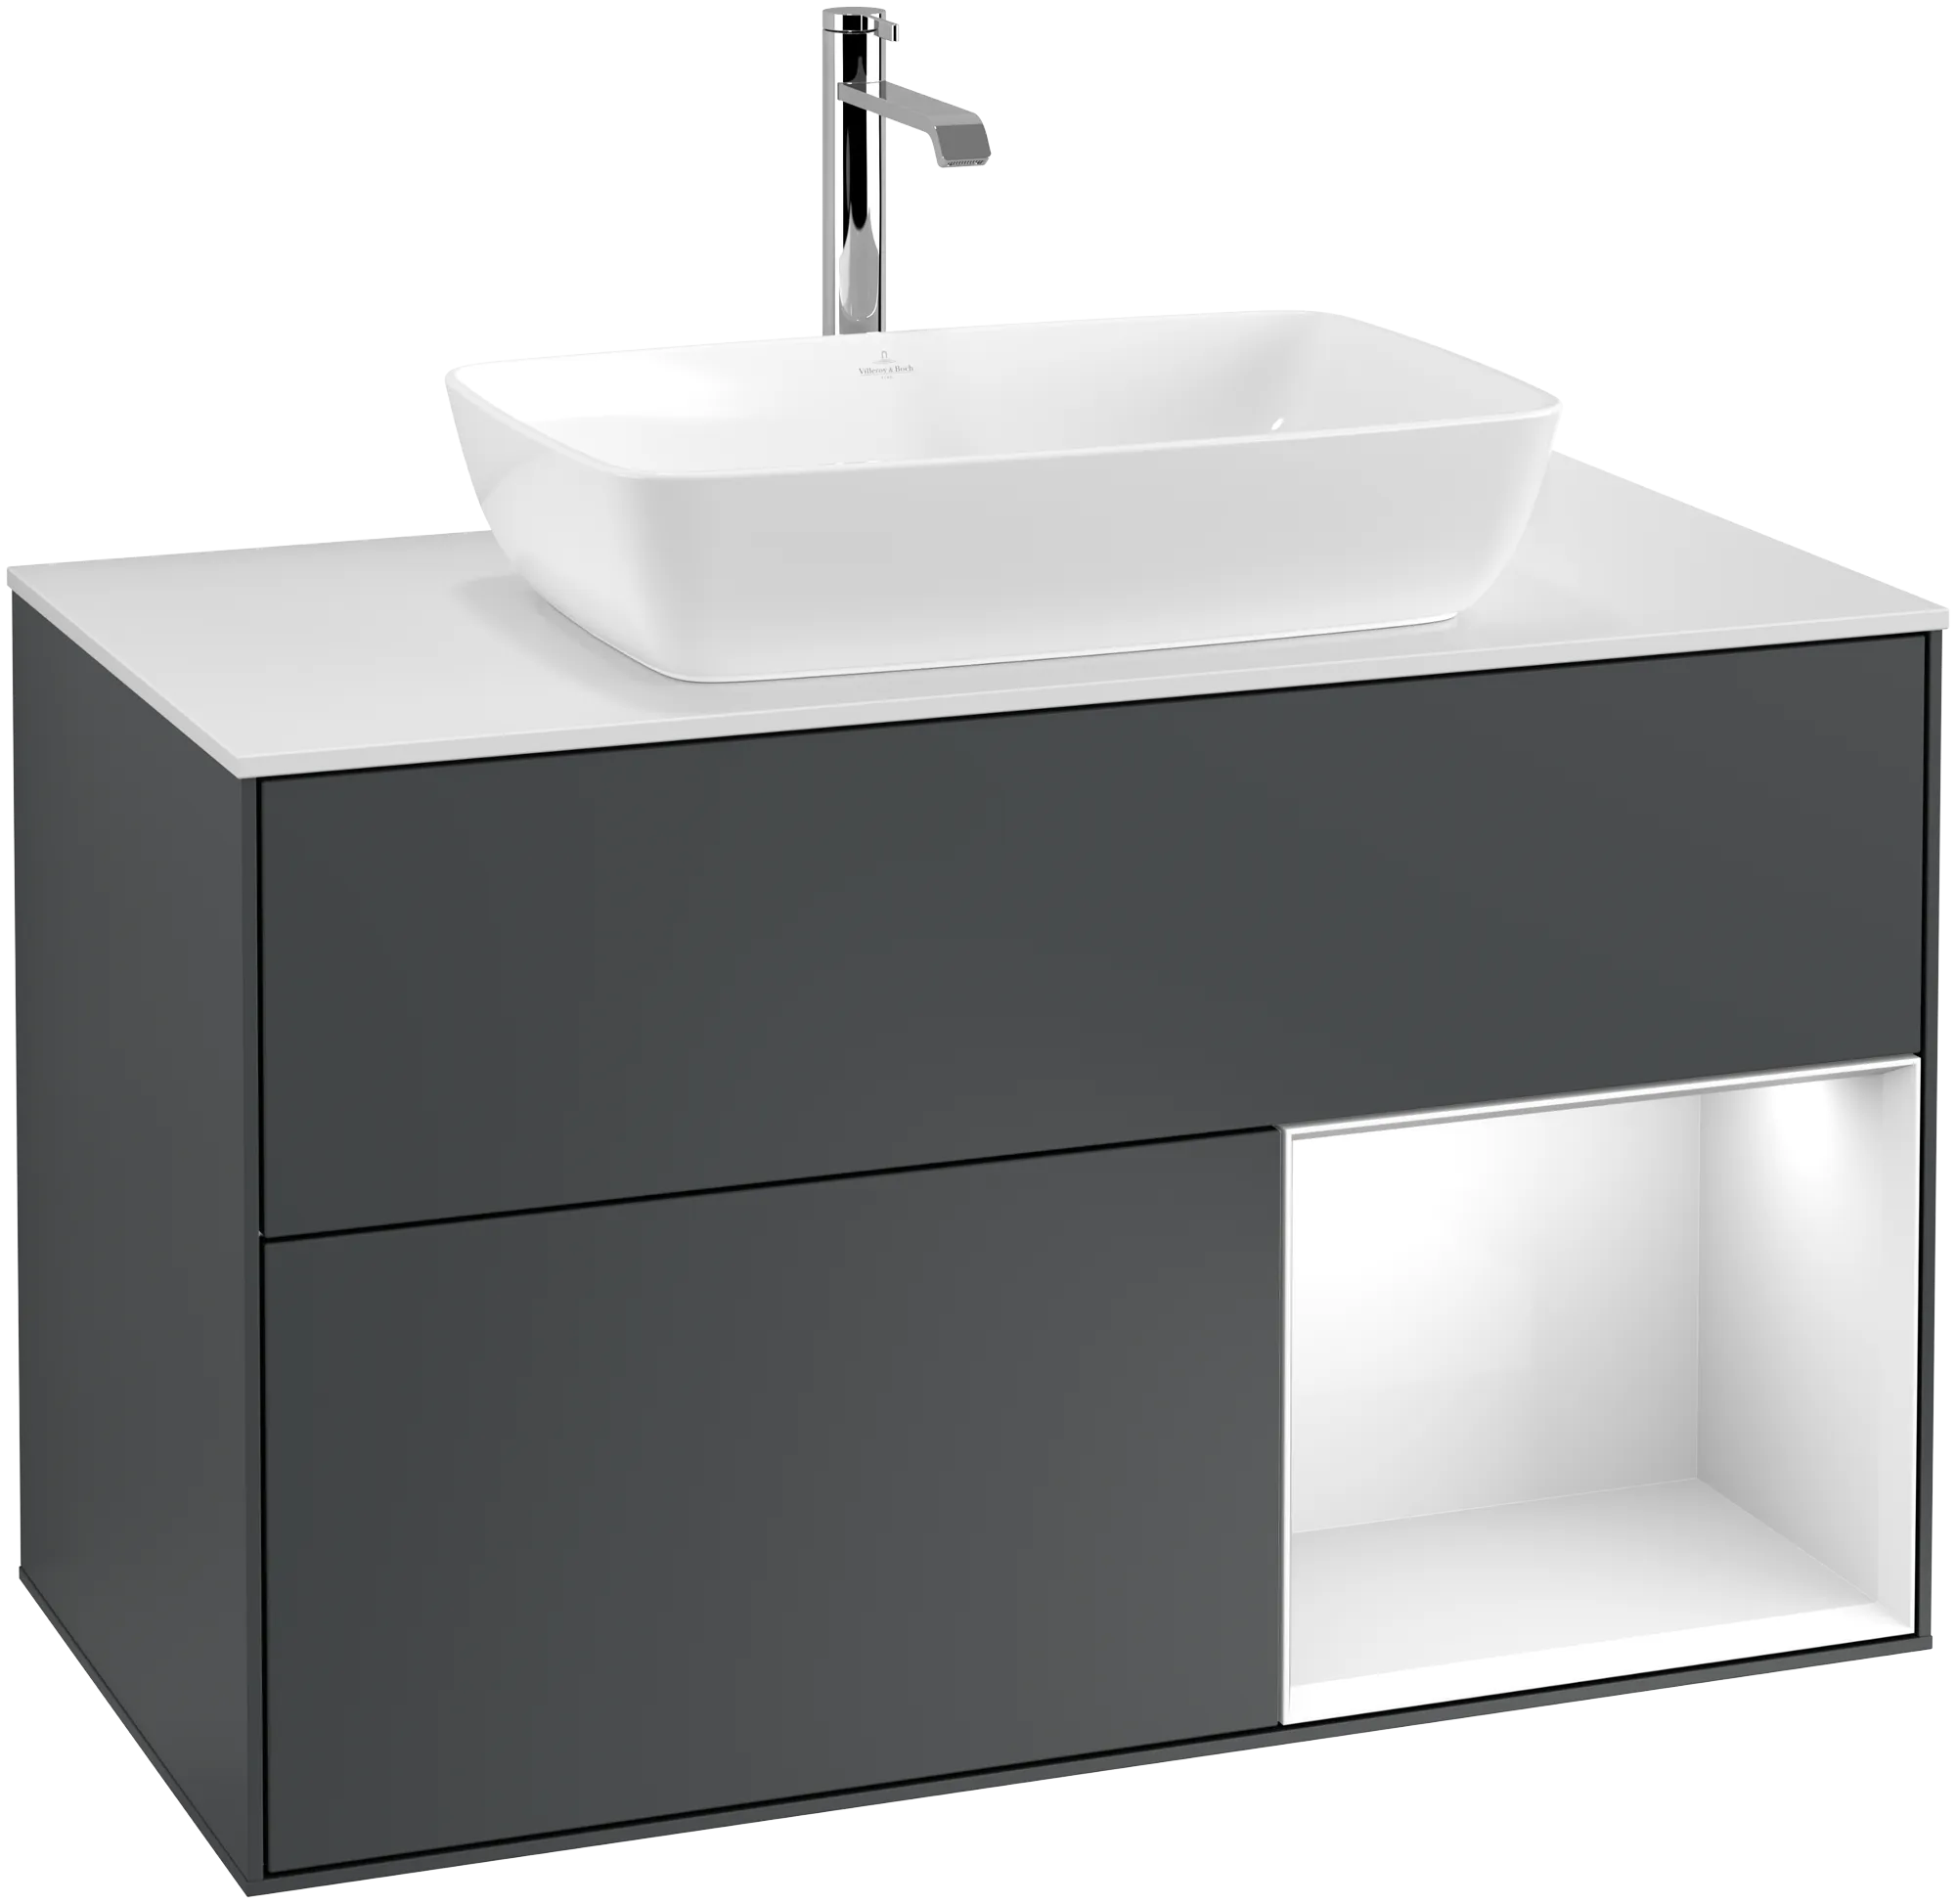 Obrázek VILLEROY BOCH Finion Vanity unit, with lighting, 2 pull-out compartments, 1000 x 603 x 501 mm, Midnight Blue Matt Lacquer / Glossy White Lacquer / Glass White Matt #G781GFHG